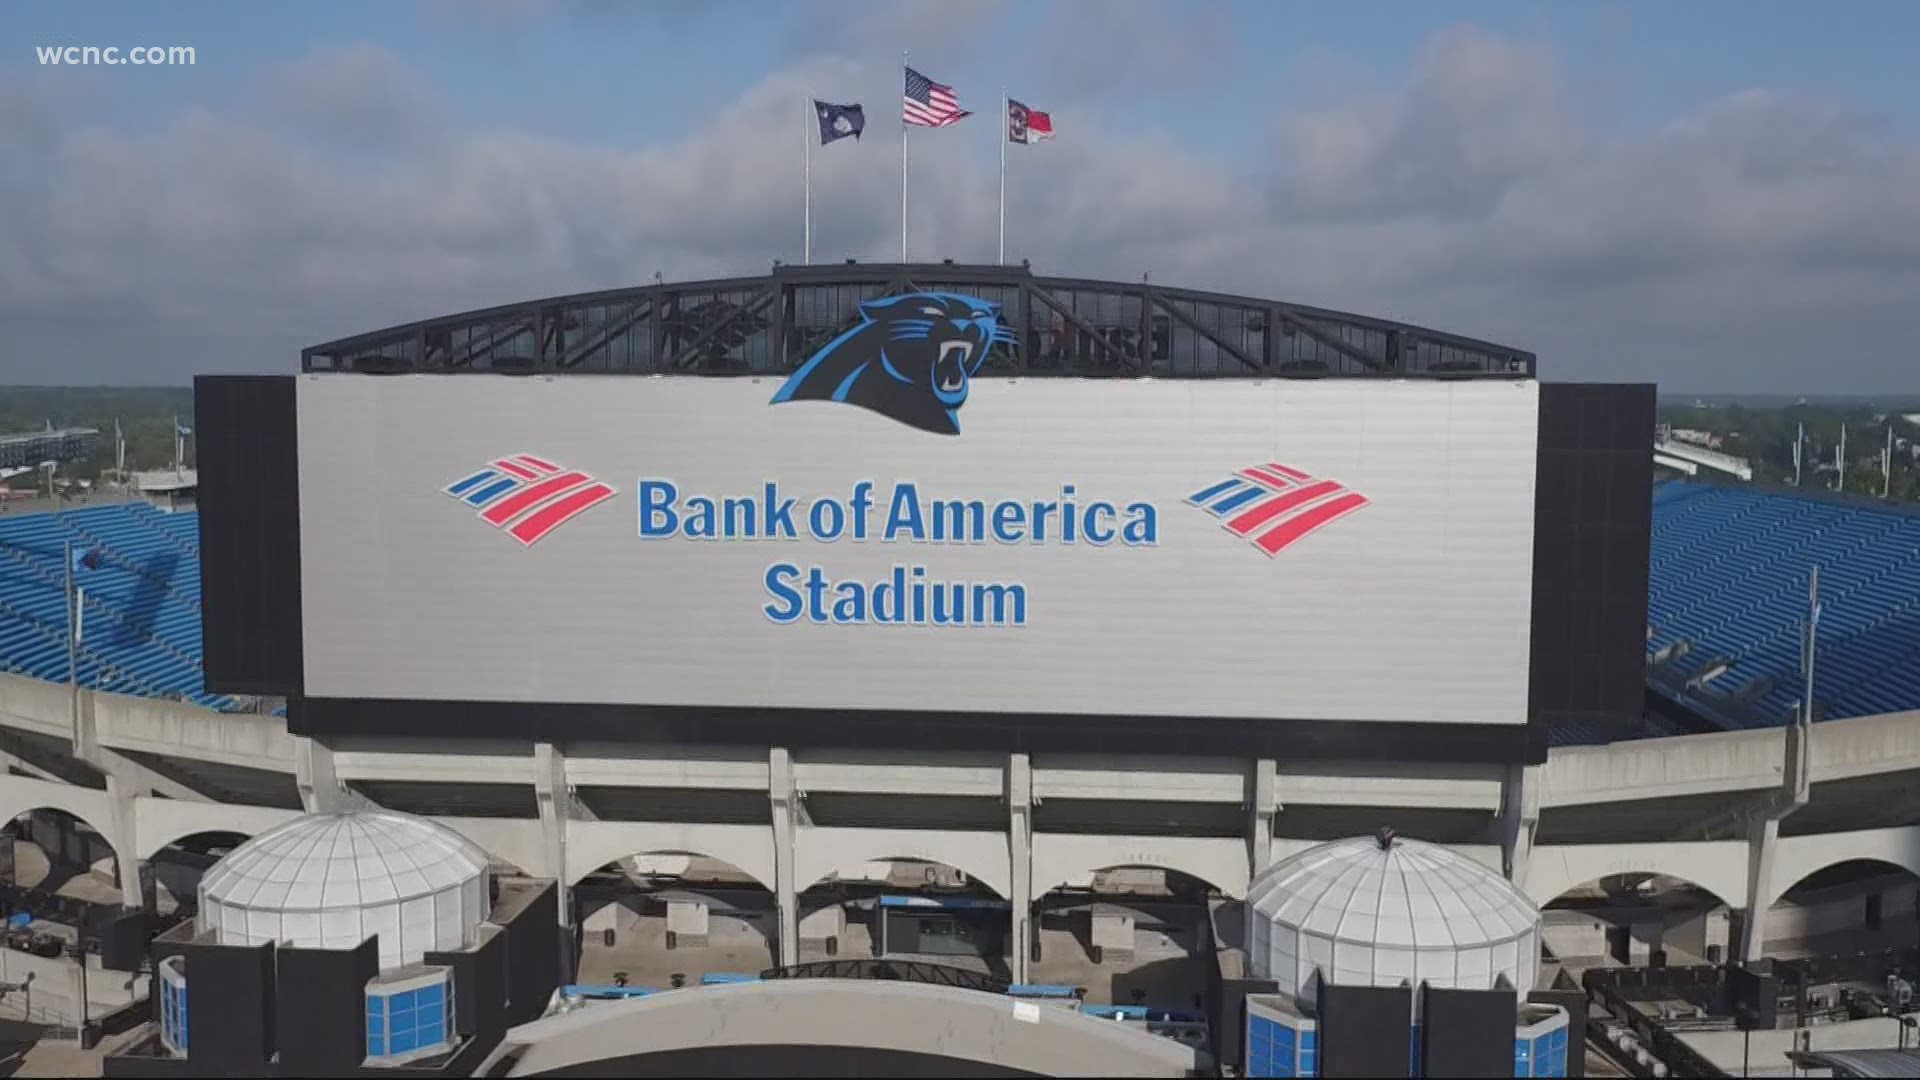 Next Friday, Oct. 2, large-capacity outdoor venues are expected to reopen, with some restrictions. The Panthers plan to host fans two days later.